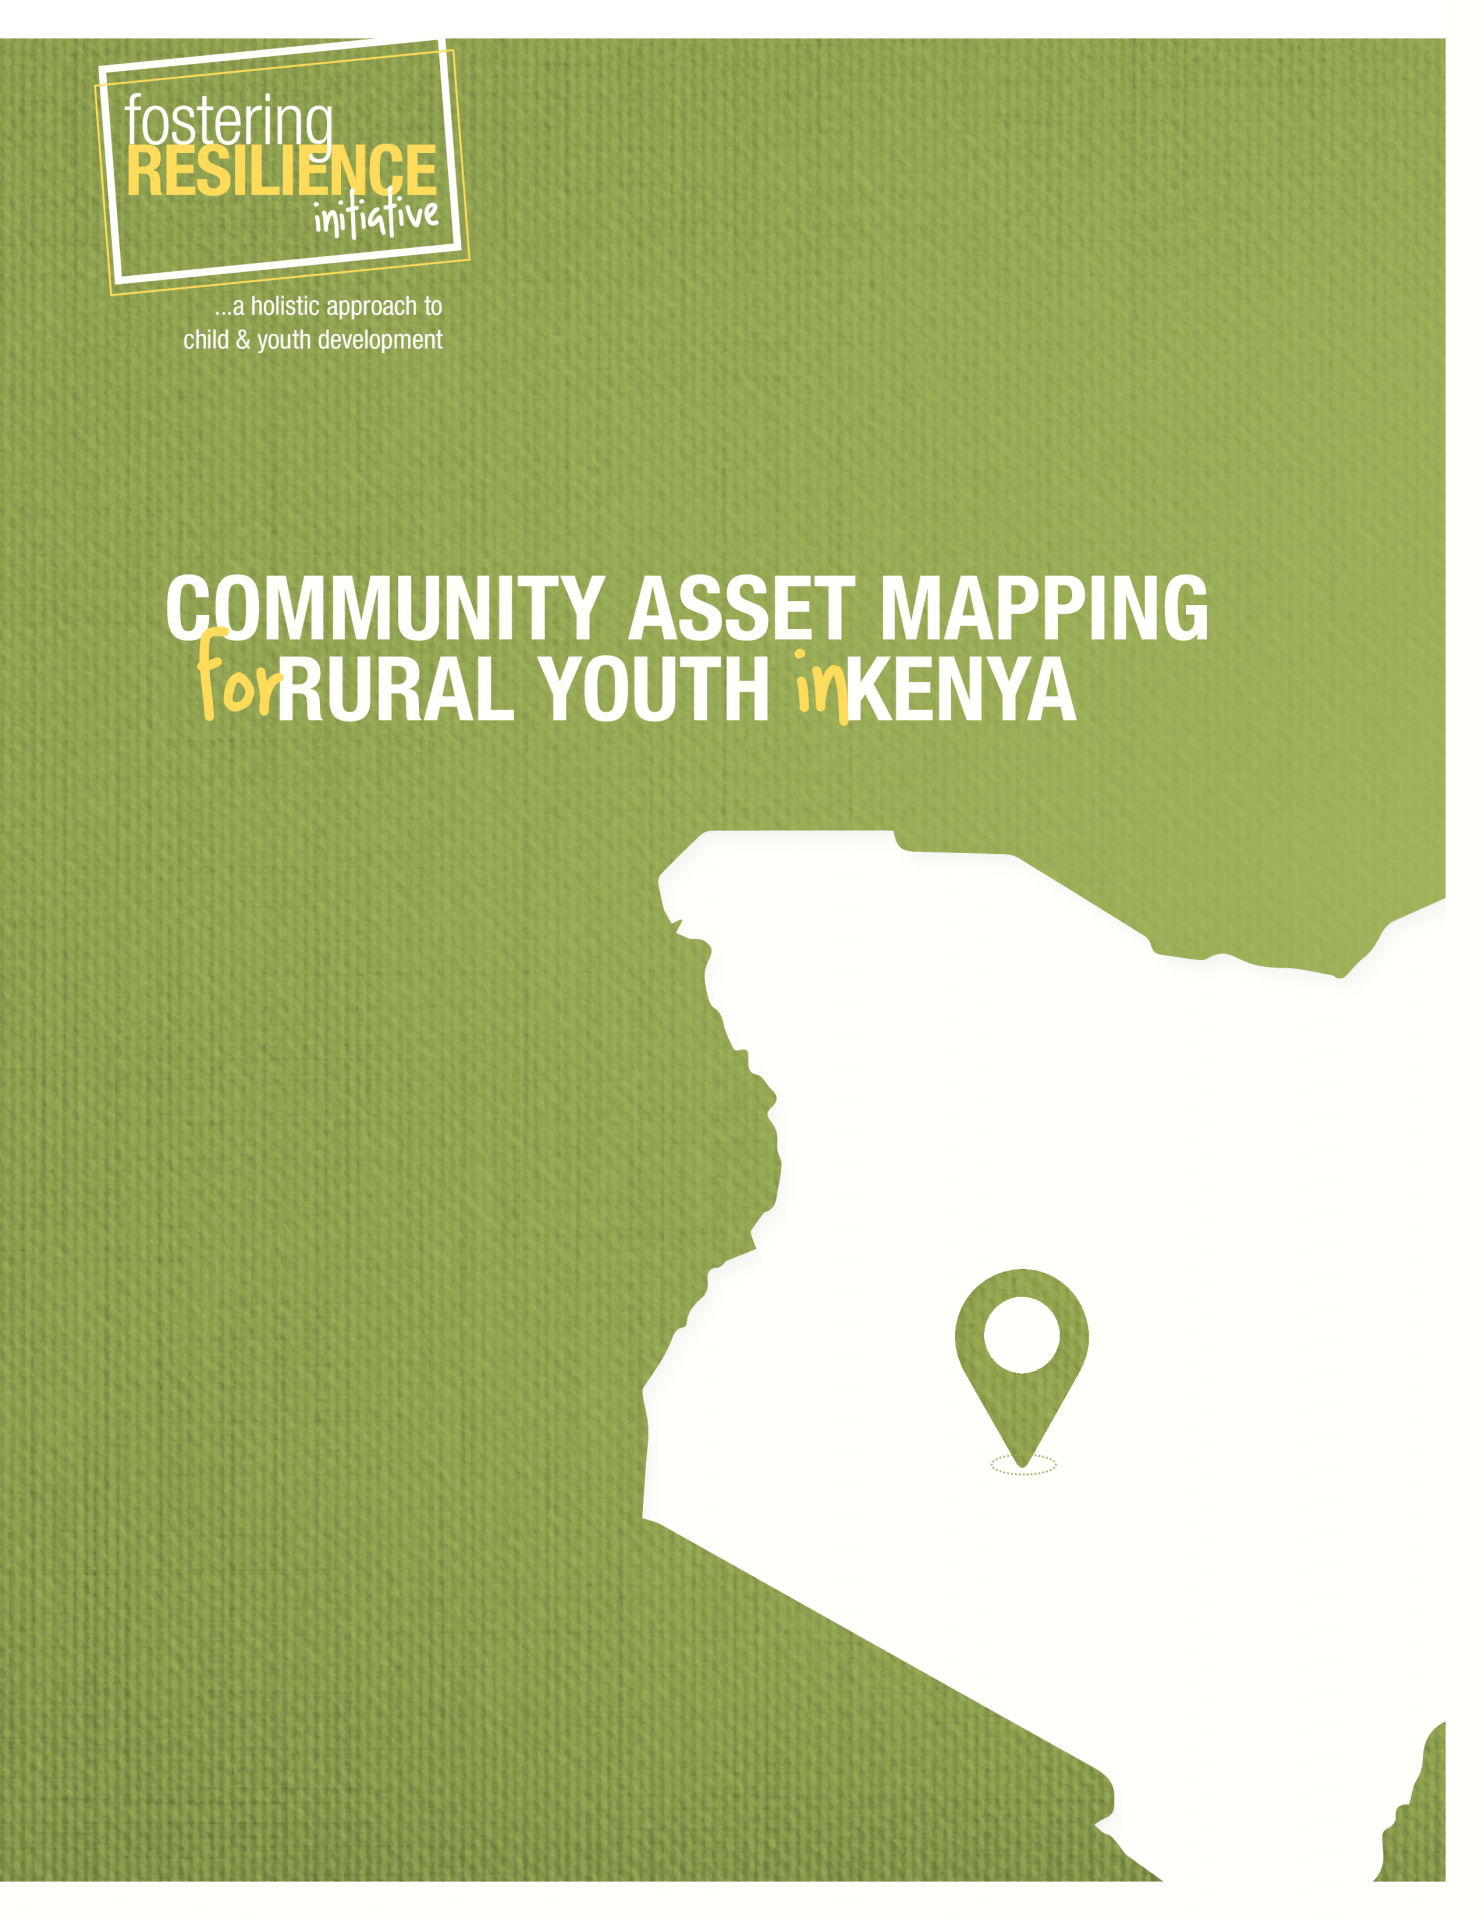 Community Asset Mapping for Rural Youth in Kenya Community Asset Mapping for Rural Youth in Kenya